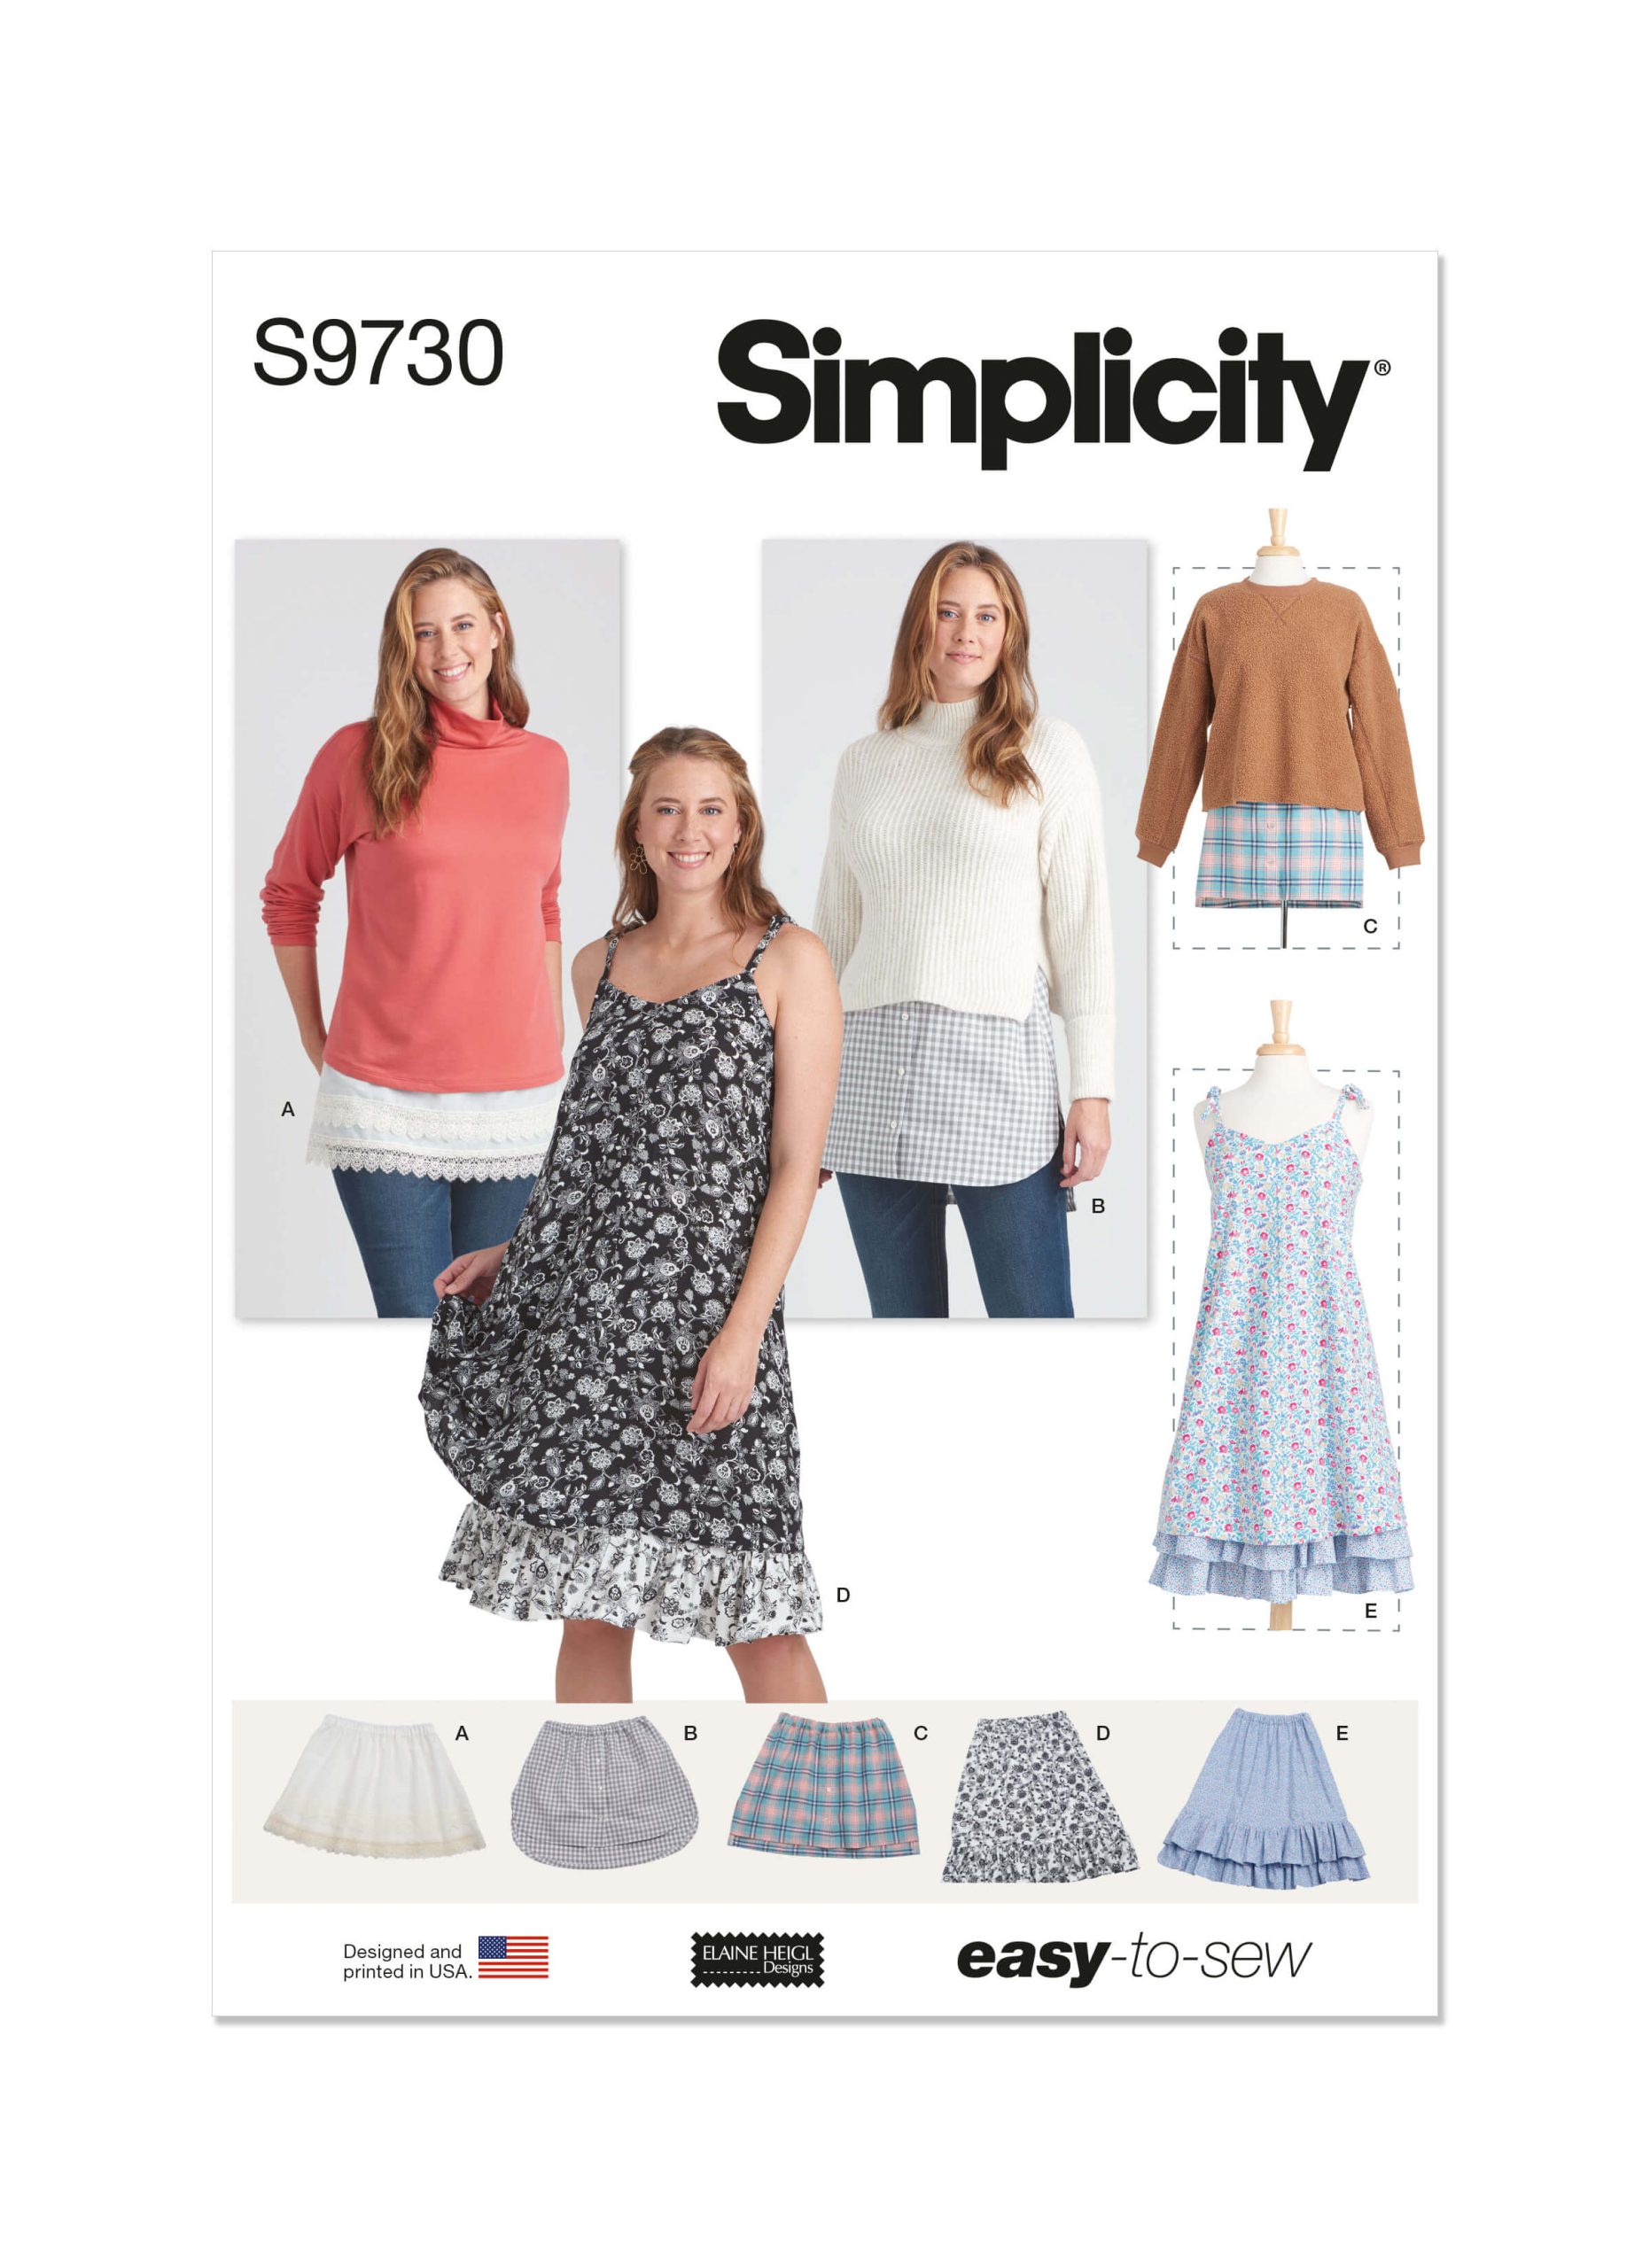 Simplicity Sewing Pattern S9730 Misses' Layering Slips by Elaine Heigl Designs